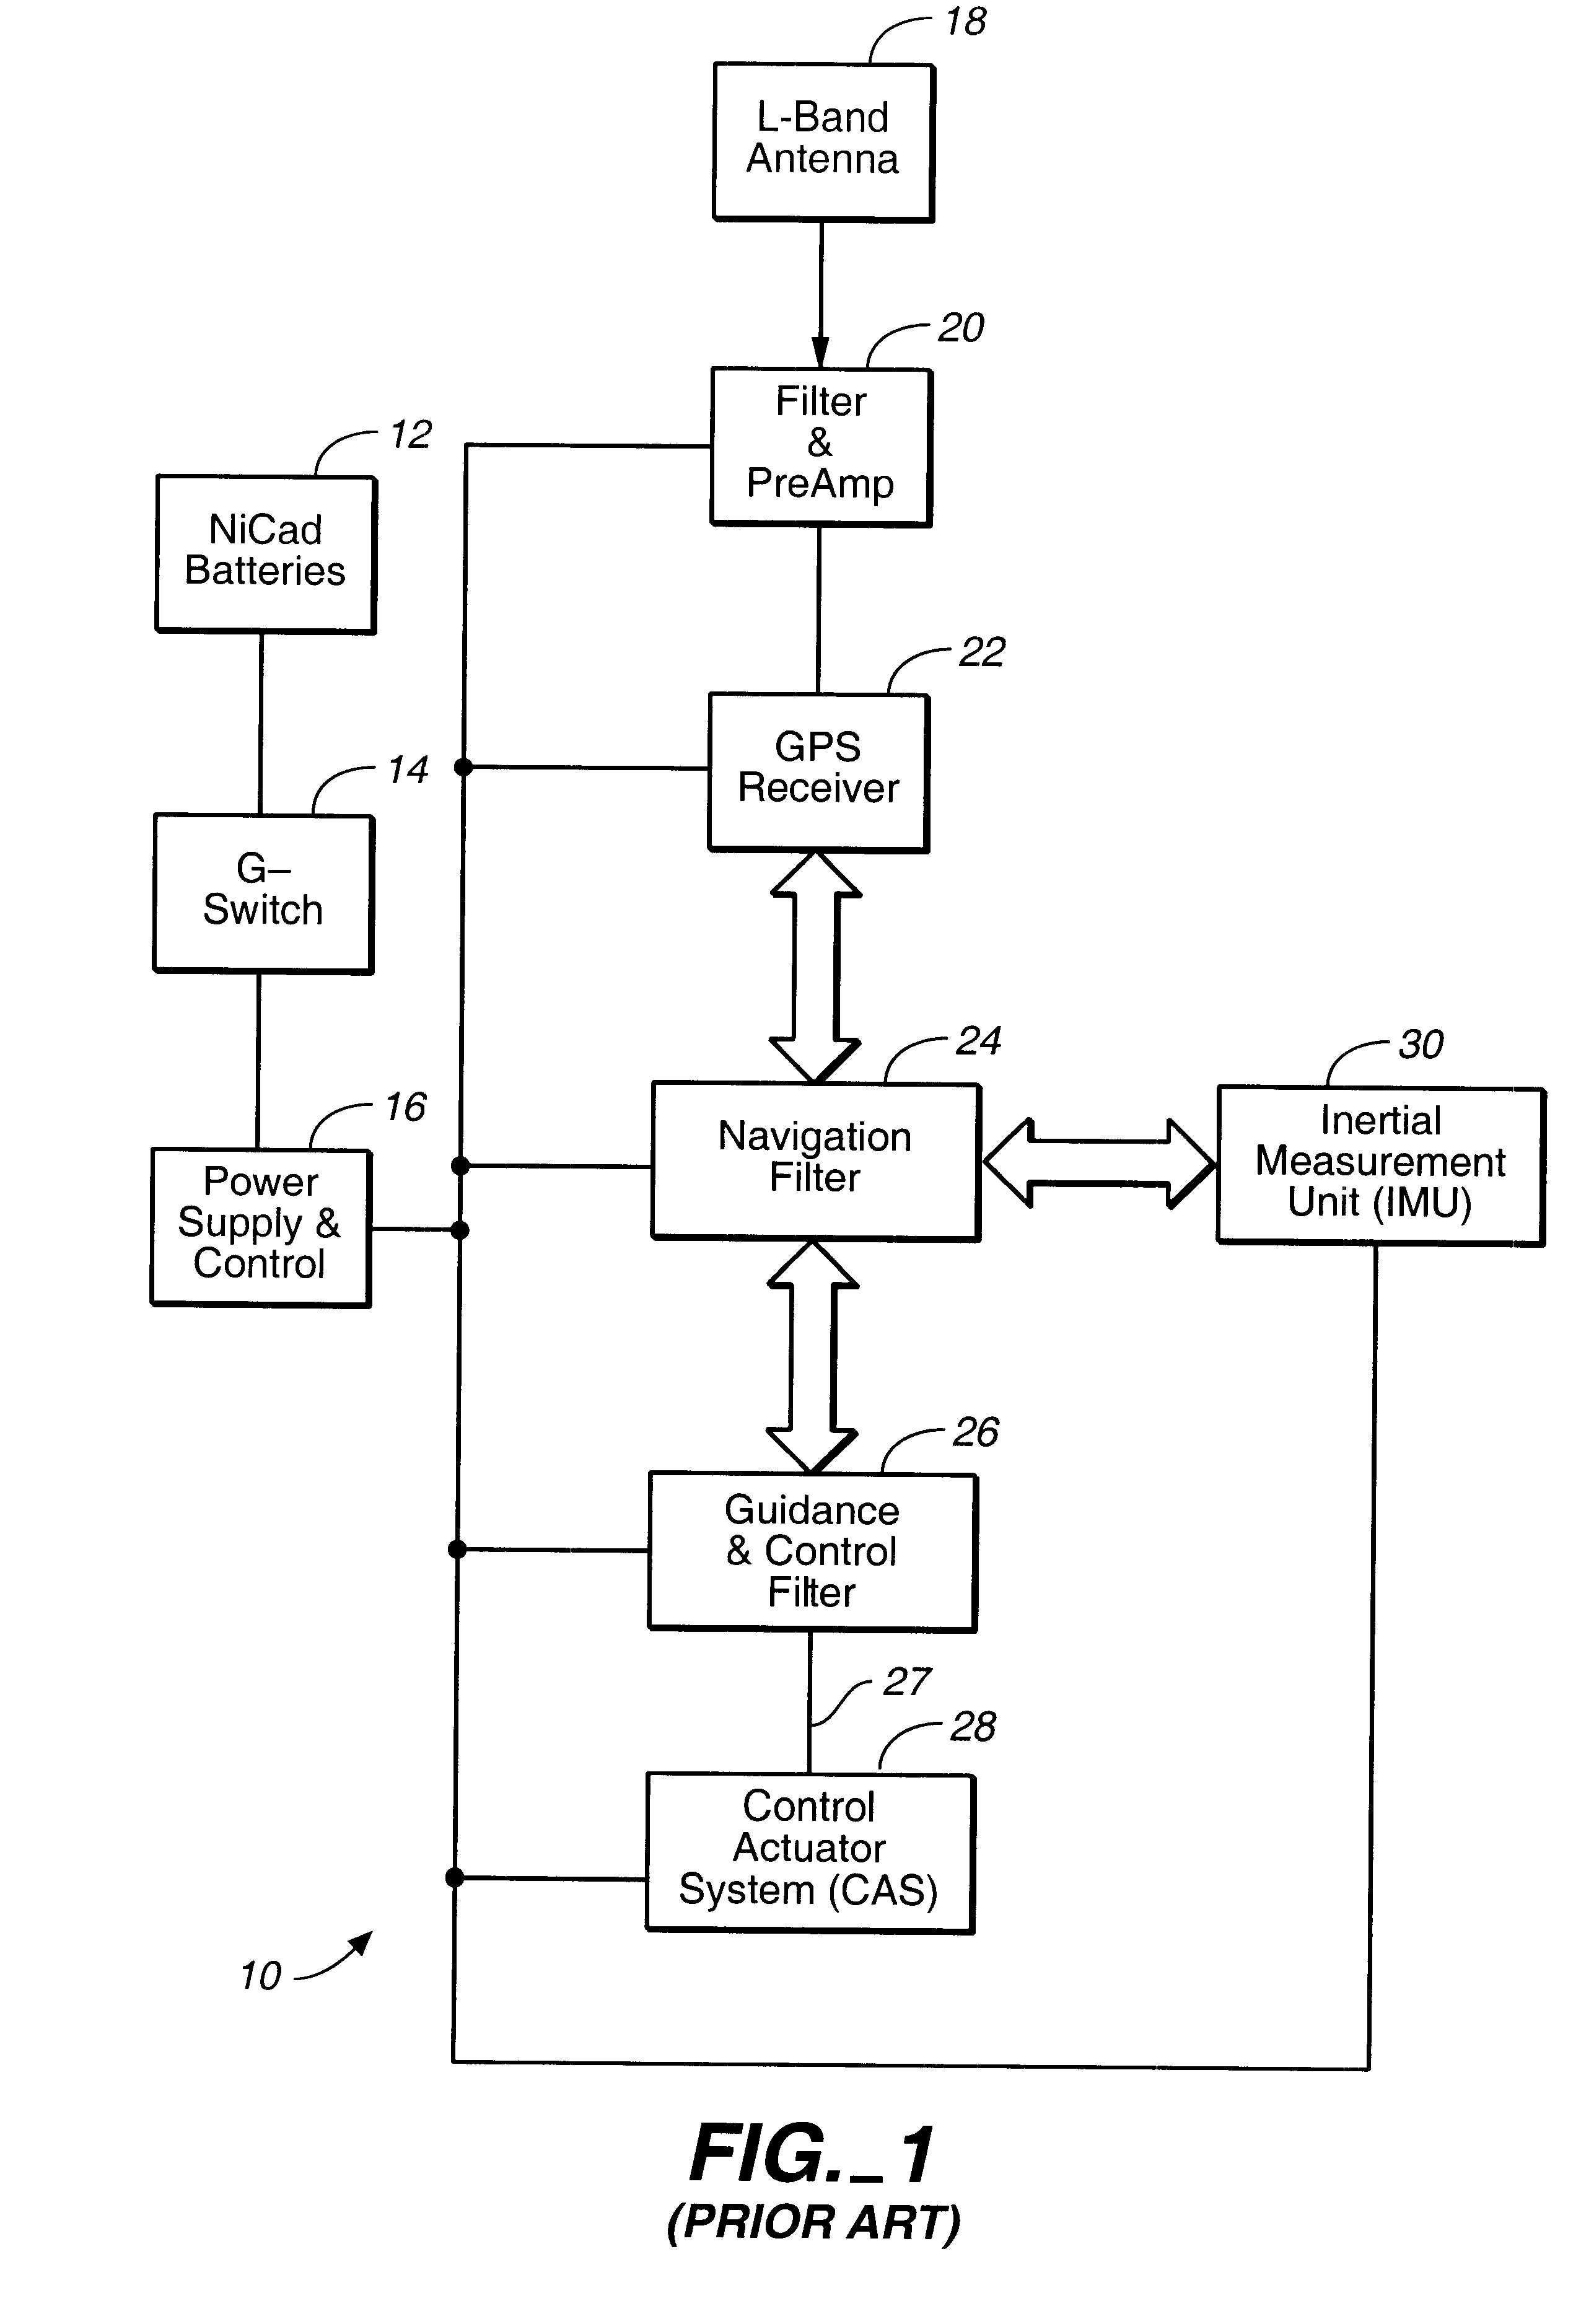 Satellite positioning-based guidance system that utilizes simulated inertial navigation system